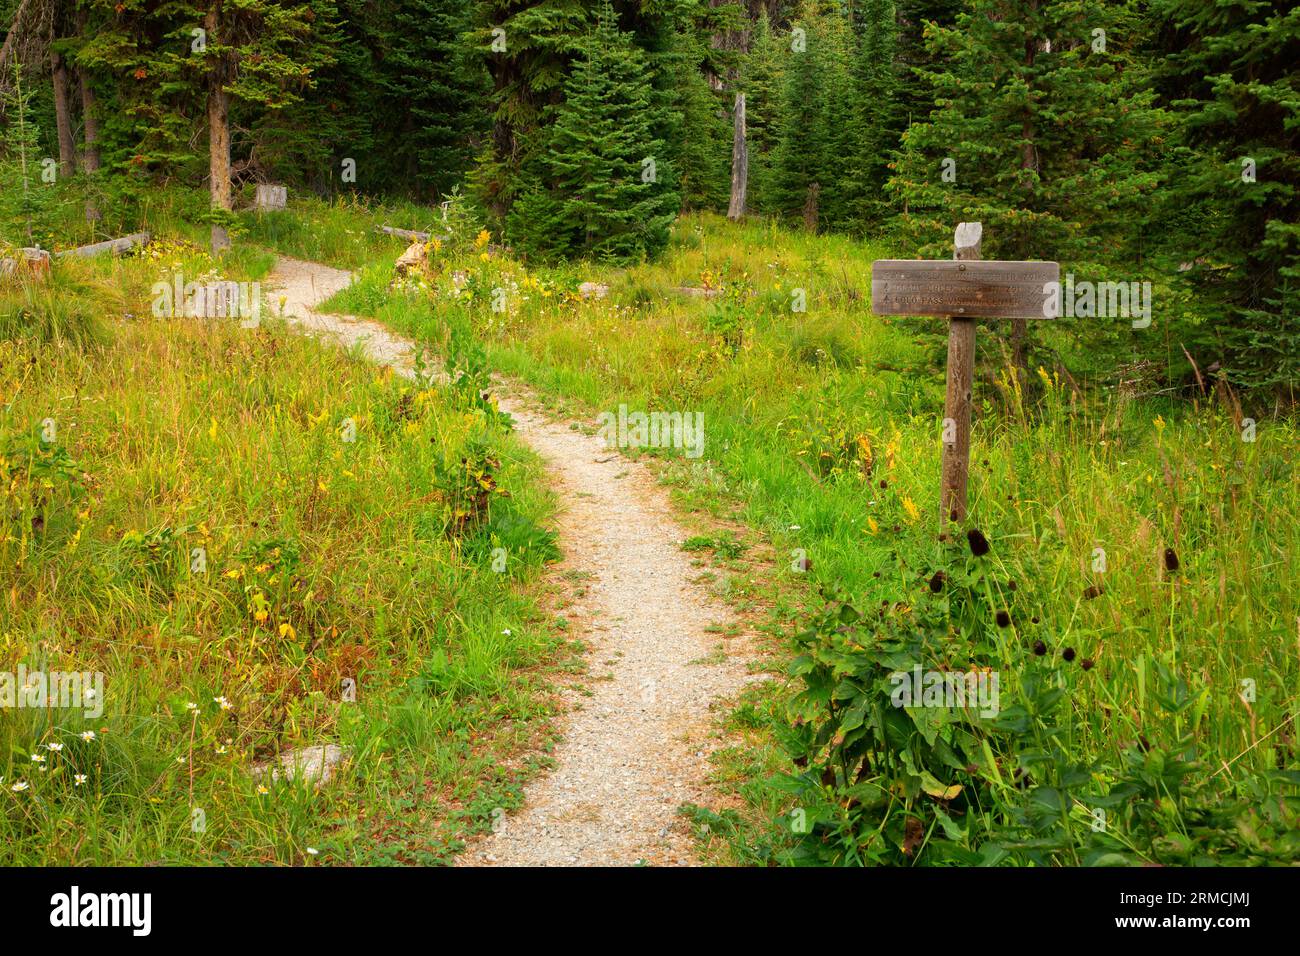 Glad Creek Camp Trail, Clearwater National Forest, Lewis and Clark National Historical Trail, Northwest Passage Scenic Byway, Idaho Stock Photo